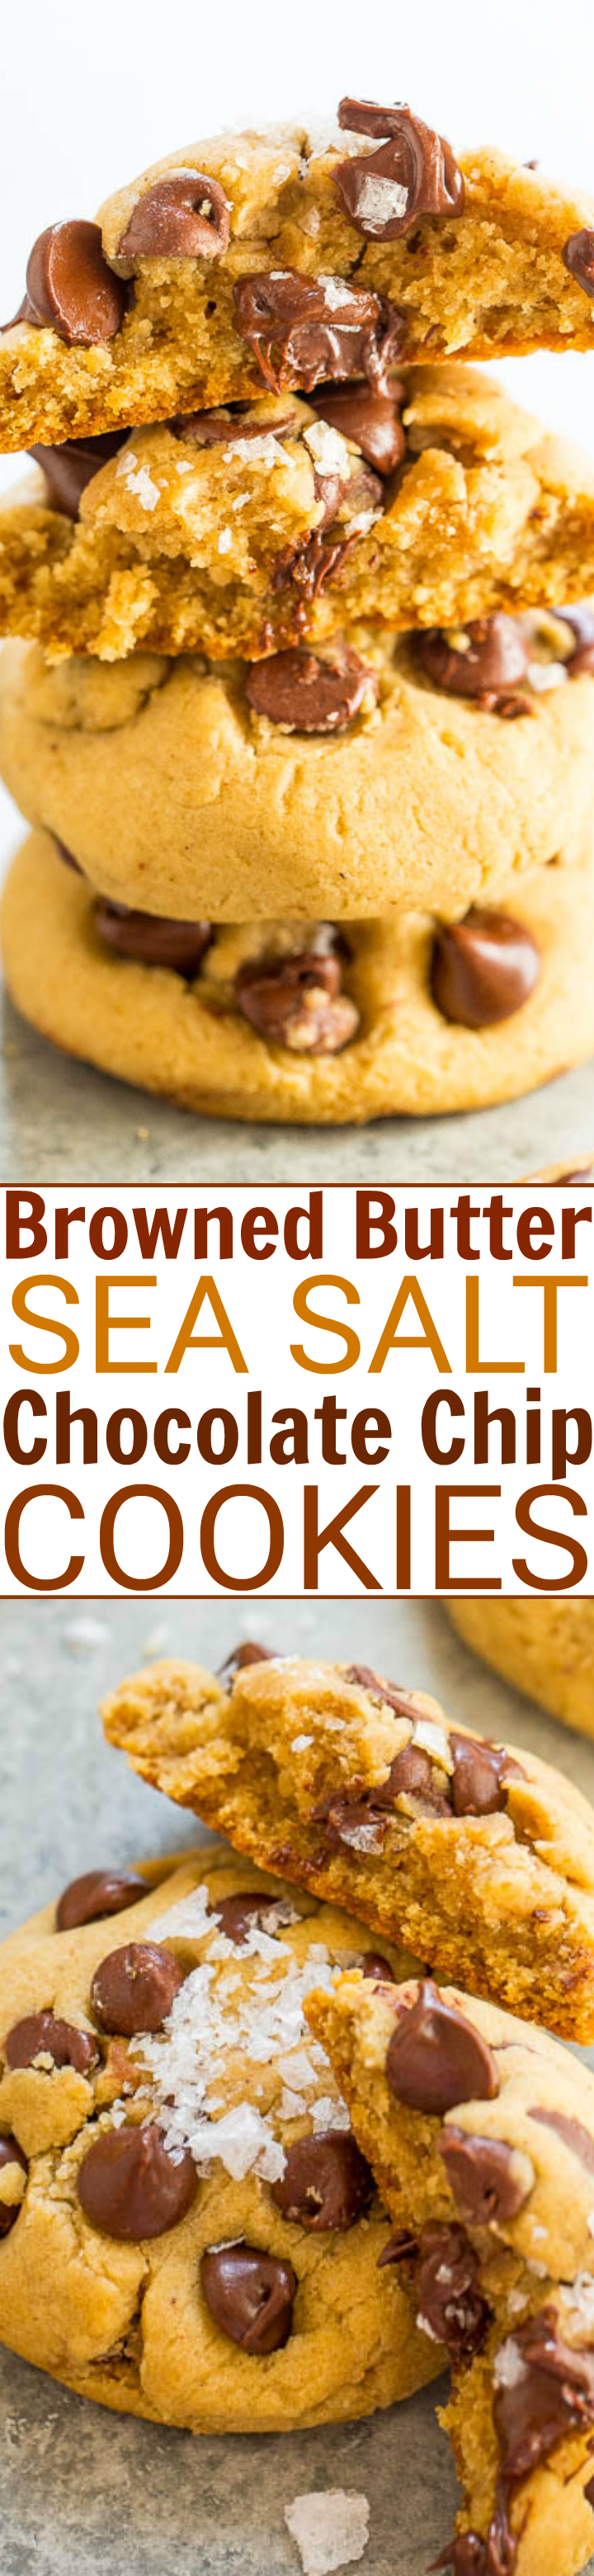 Browned Butter Sea Salt Chocolate Chip Cookies – SALTY-AND-SWEET, soft, and chewy chocolate chip cookies that are PERFECT!! An EASY, one-bowl, no-mixer recipe that's just the BEST!!